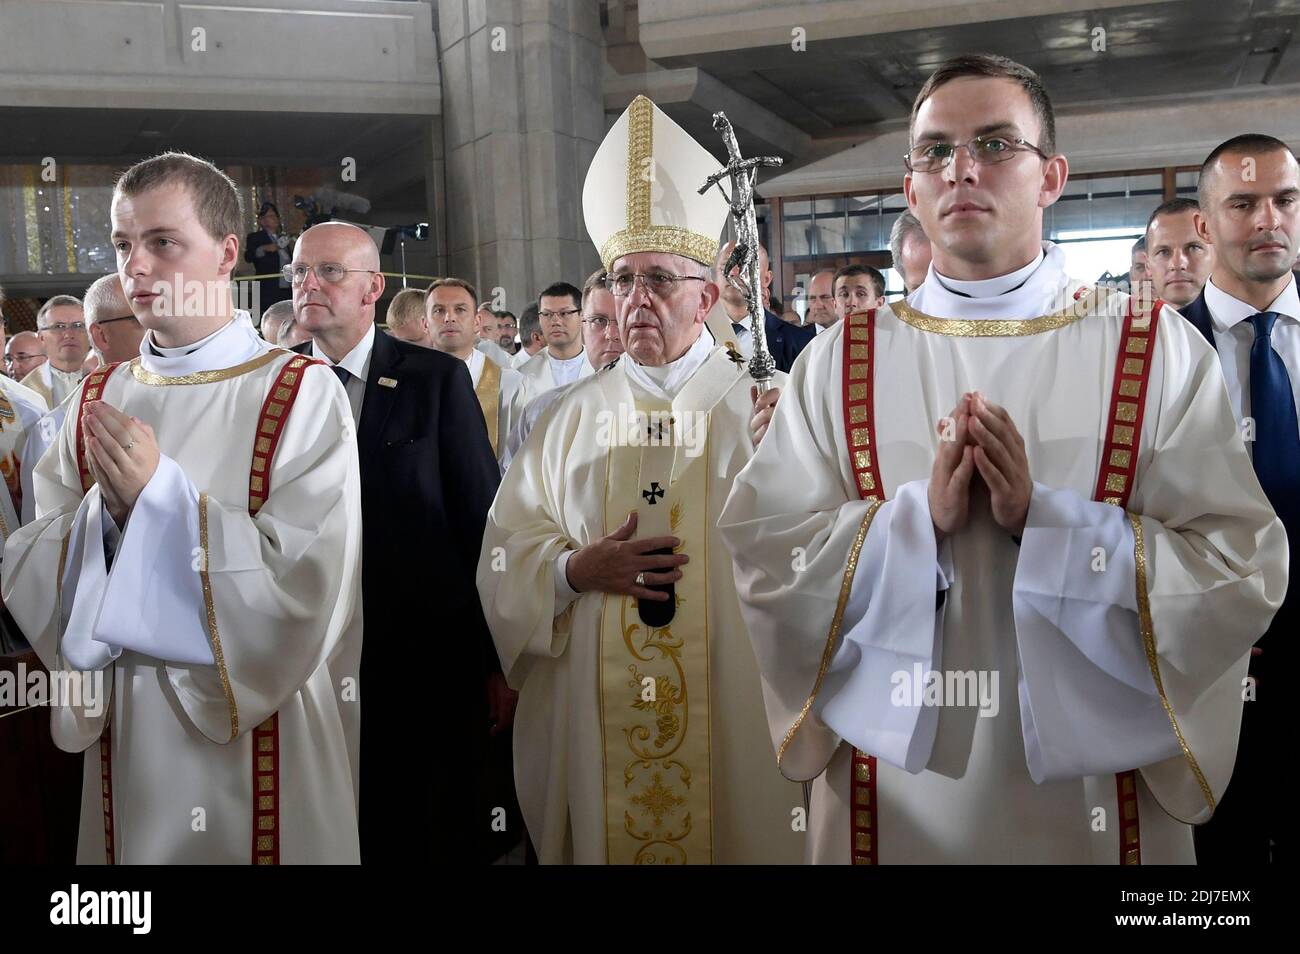 Pope Francis celebrates a Mass at the Sanctuary of St. John Paul II in Krakow, Poland on July 30, 2016. Pope Francis is in Krakow to celebrate World Youth Day, the event in which hundreds of thousands of young people from all over the world gather. Photo by ABACAPRESS.COM Stock Photo